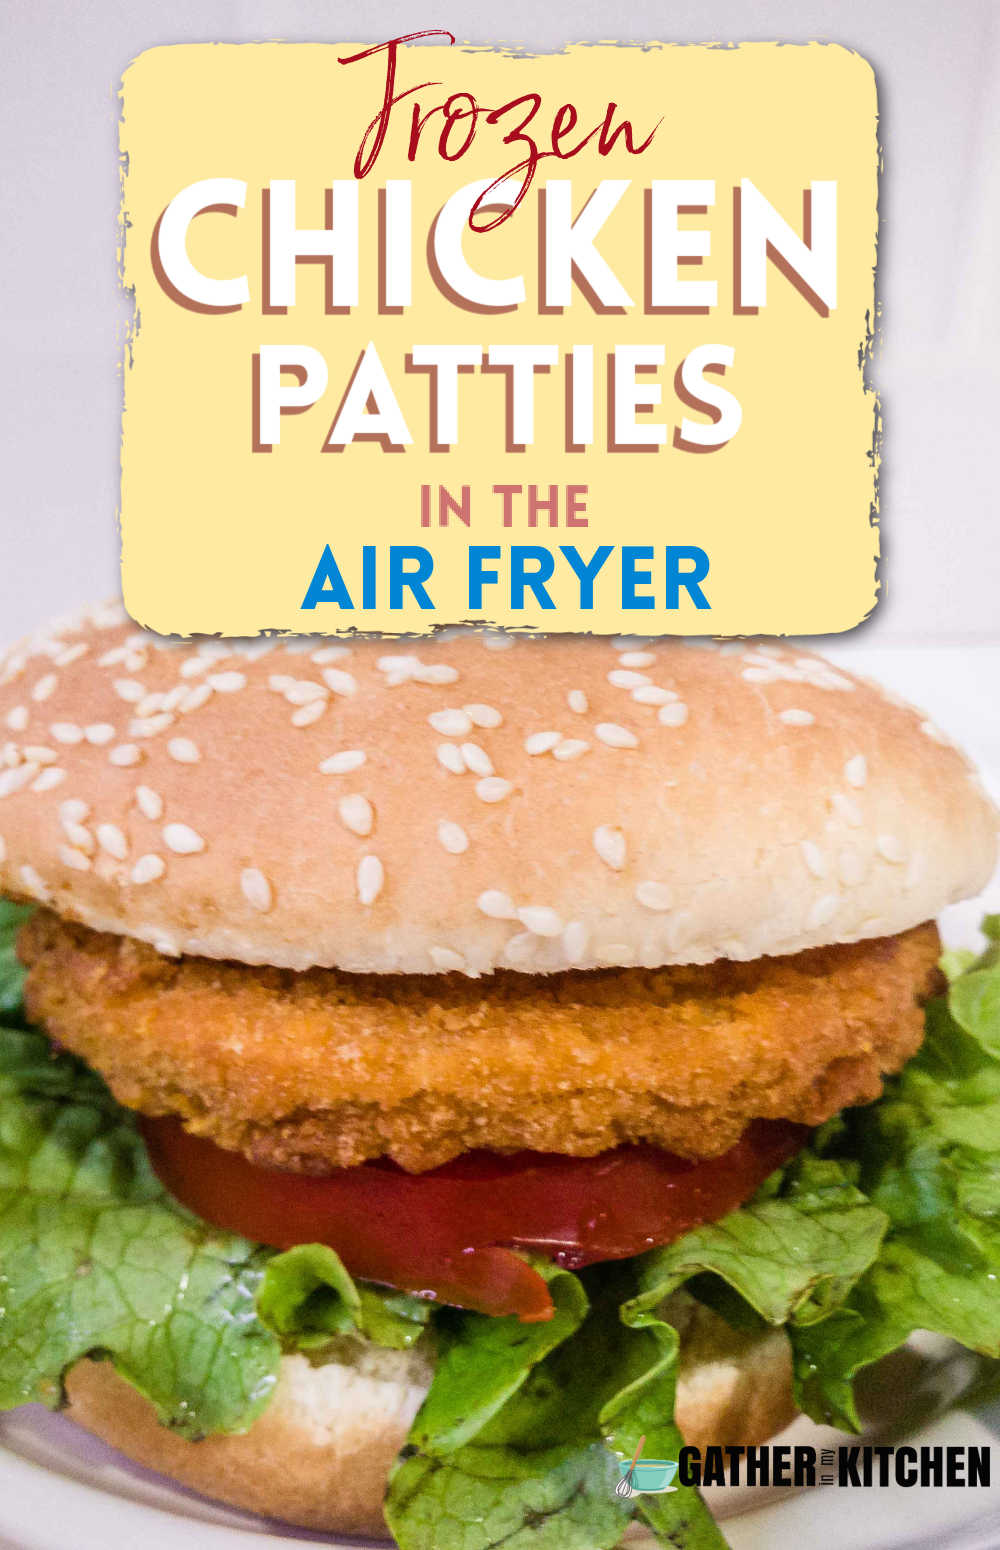 Pin image: top says "Frozen Chicken Patties in the air fryer" with a picture of a chicken sandwich underneath.